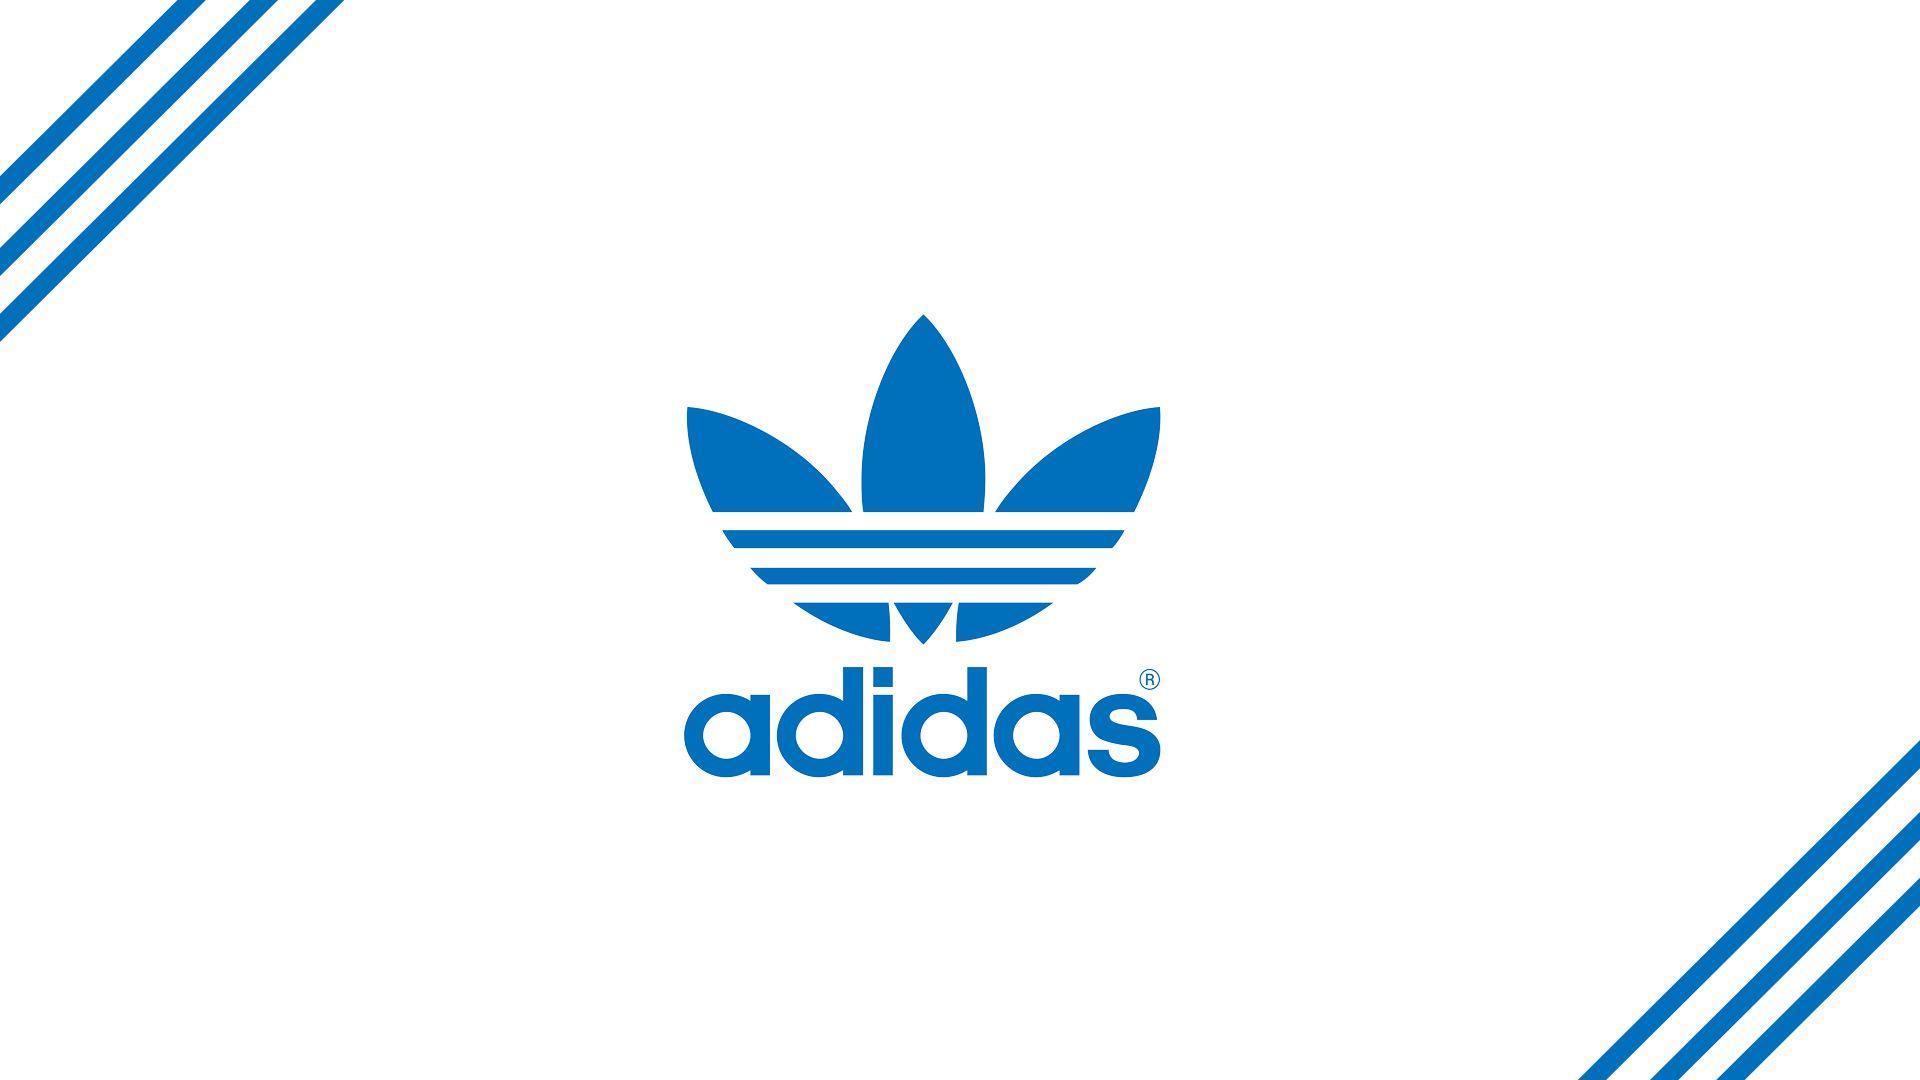 Adidas Wallpapers 5 amazing backgrounds 23242 HD Wallpapers